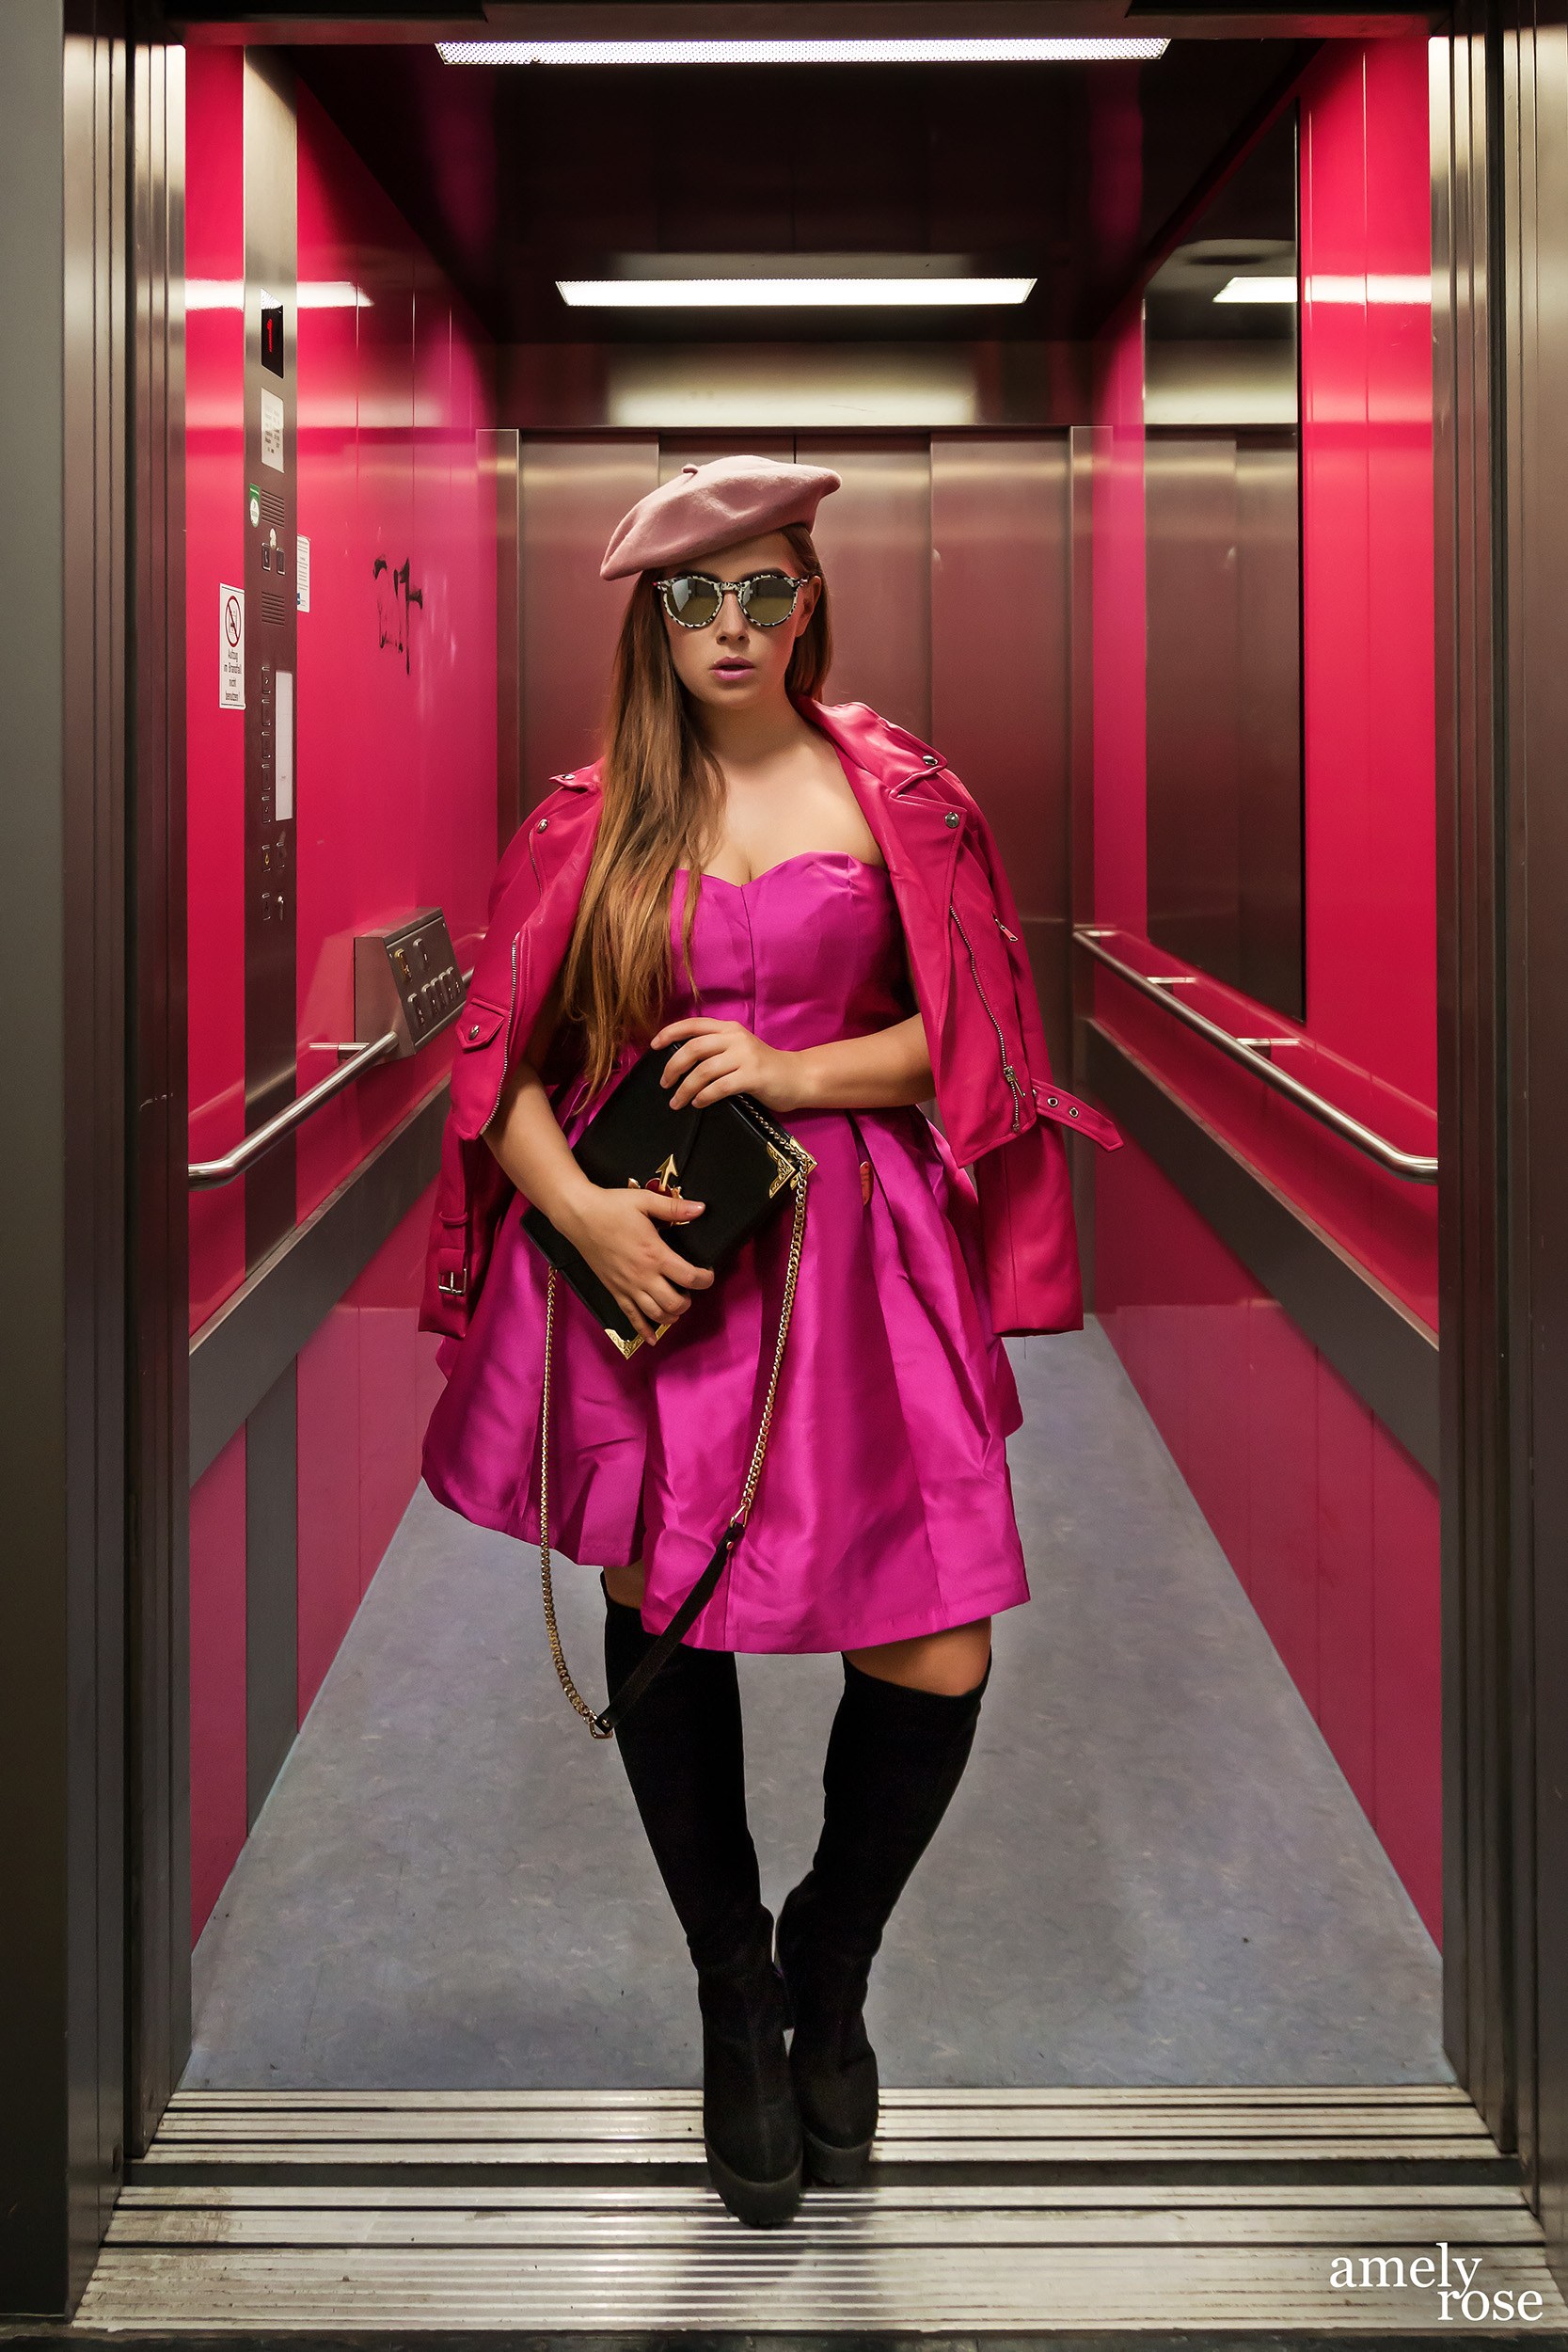 Amely Rose german influencer in a stylish pink #ootd in a lift. This fashioneditorial reminds of #fiftyshadesof rose.